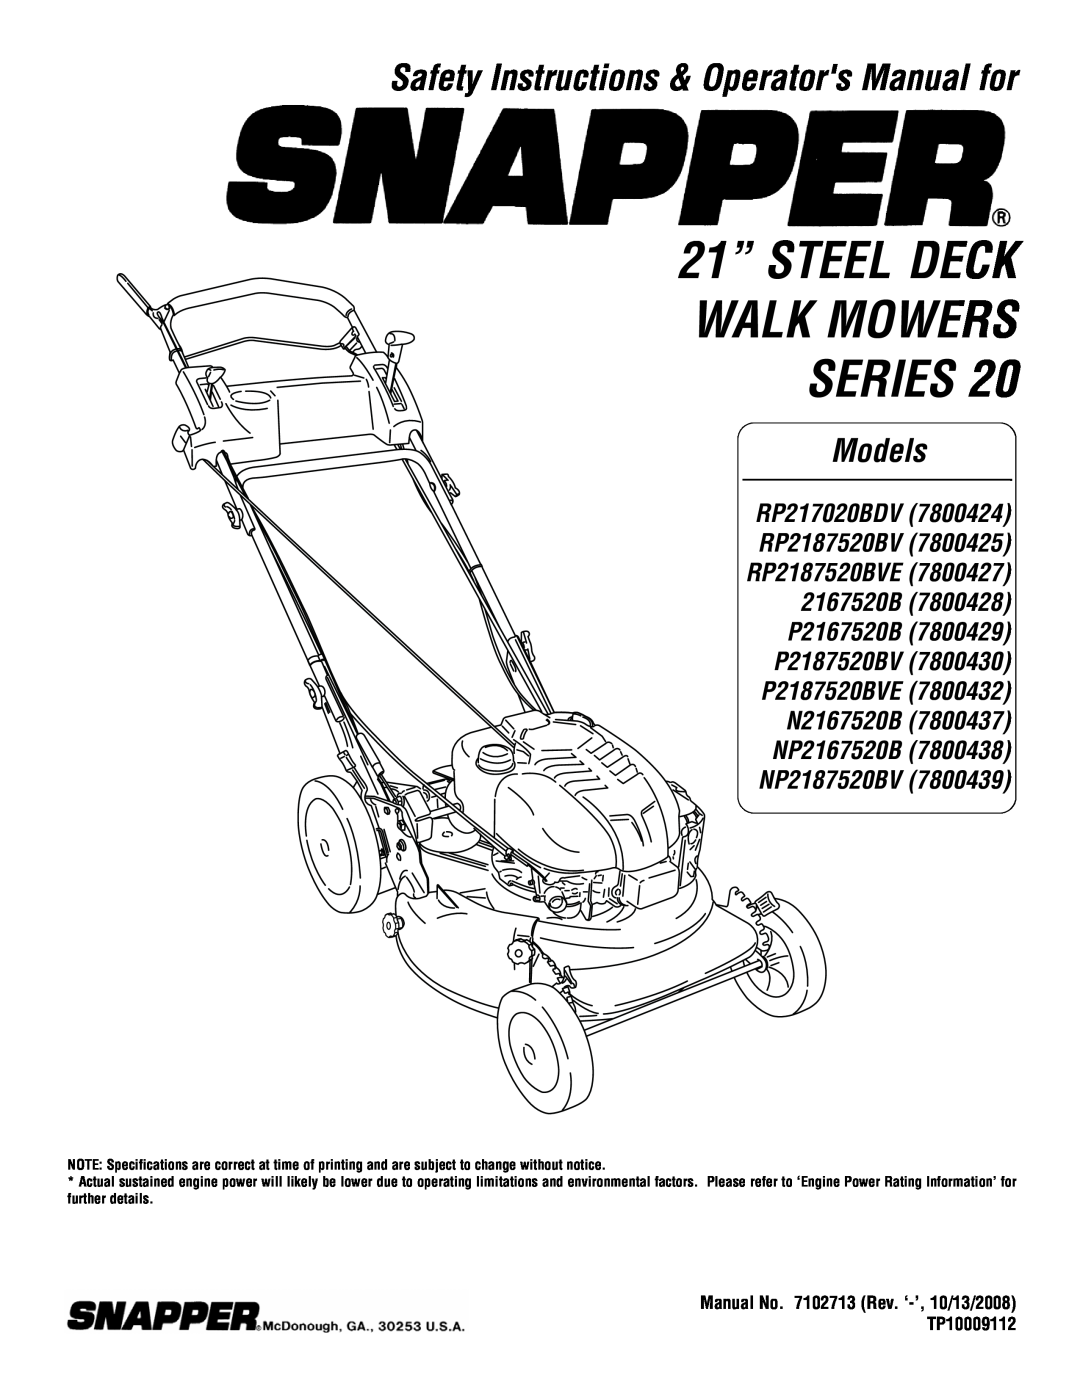 Snapper P2167520B (7800429) specifications 21” STEEL DECK WALK MOWERS SERIES, Safety Instructions & Operators Manual for 